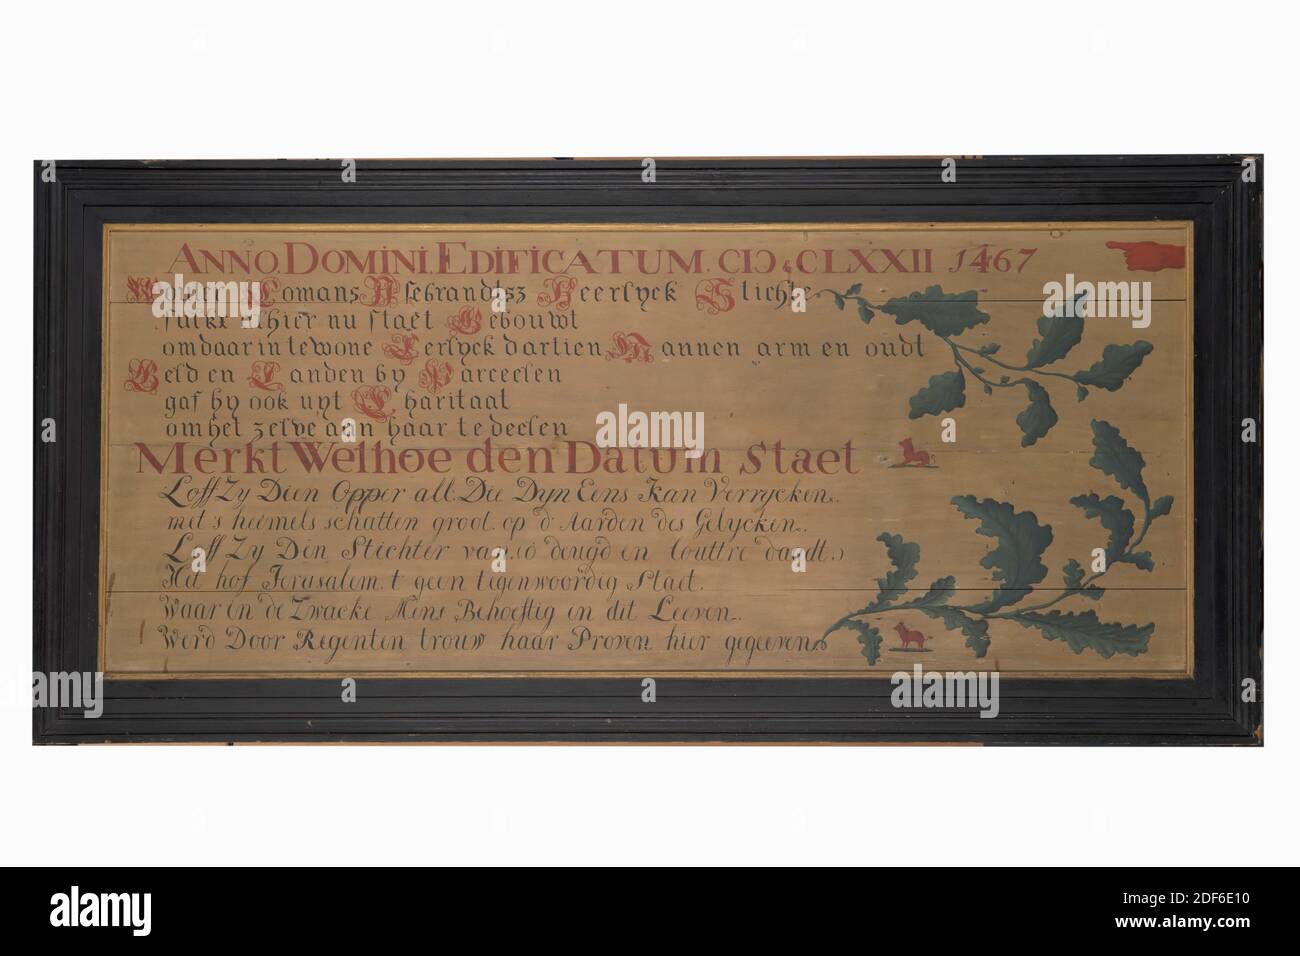 plate information, Anonymous, 17th century, painted, Wooden sign painted with a text concerning the foundation of the Jerusalem Court, in a black-painted wooden frame. At the top of the board is in red letters ANNO DOMINI EDIFICATUM M.CLXXII 1467 with underneath a six-line poem in black letters with red capital letters. The poem is dedicated to the founder Wouter Comans IJsebrandtsz, whose name is mentioned in the first line of the poem. Below is written in red letters Merkt Welthoe den Datum with a six-line poem in black letters. To the right of the text is a green branch with oak leaves with Stock Photo